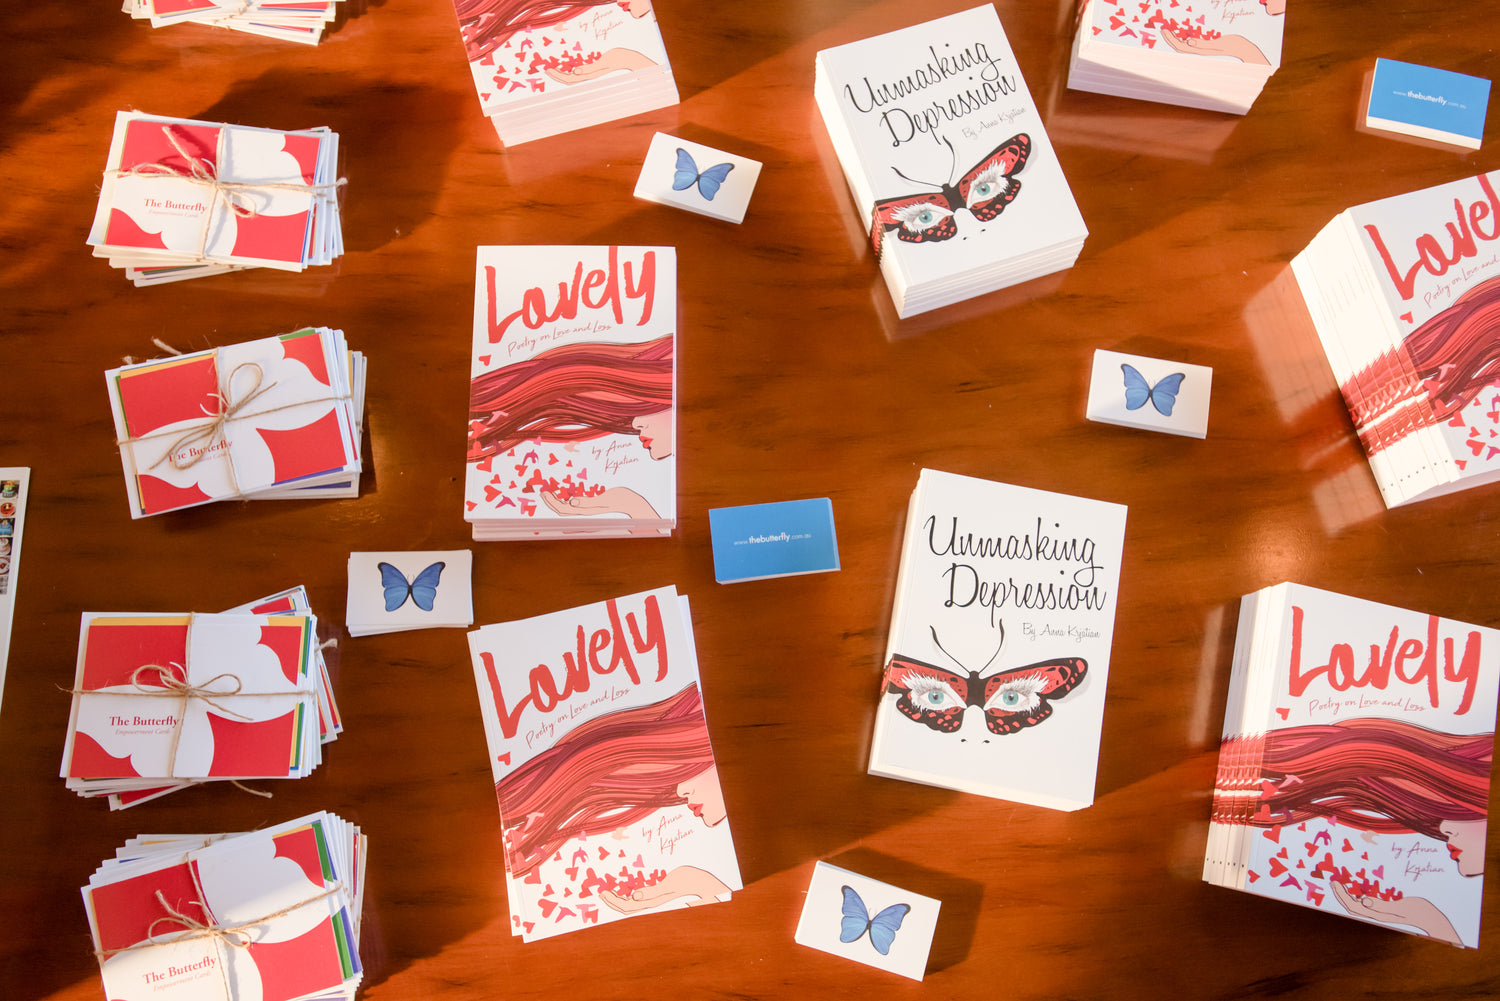 Red coloured Empowerment Cards and two books "Unmasking Depression" and "Lovely - Poetry on Love and Loss" and Butterfly business cards are set up on a brown table.